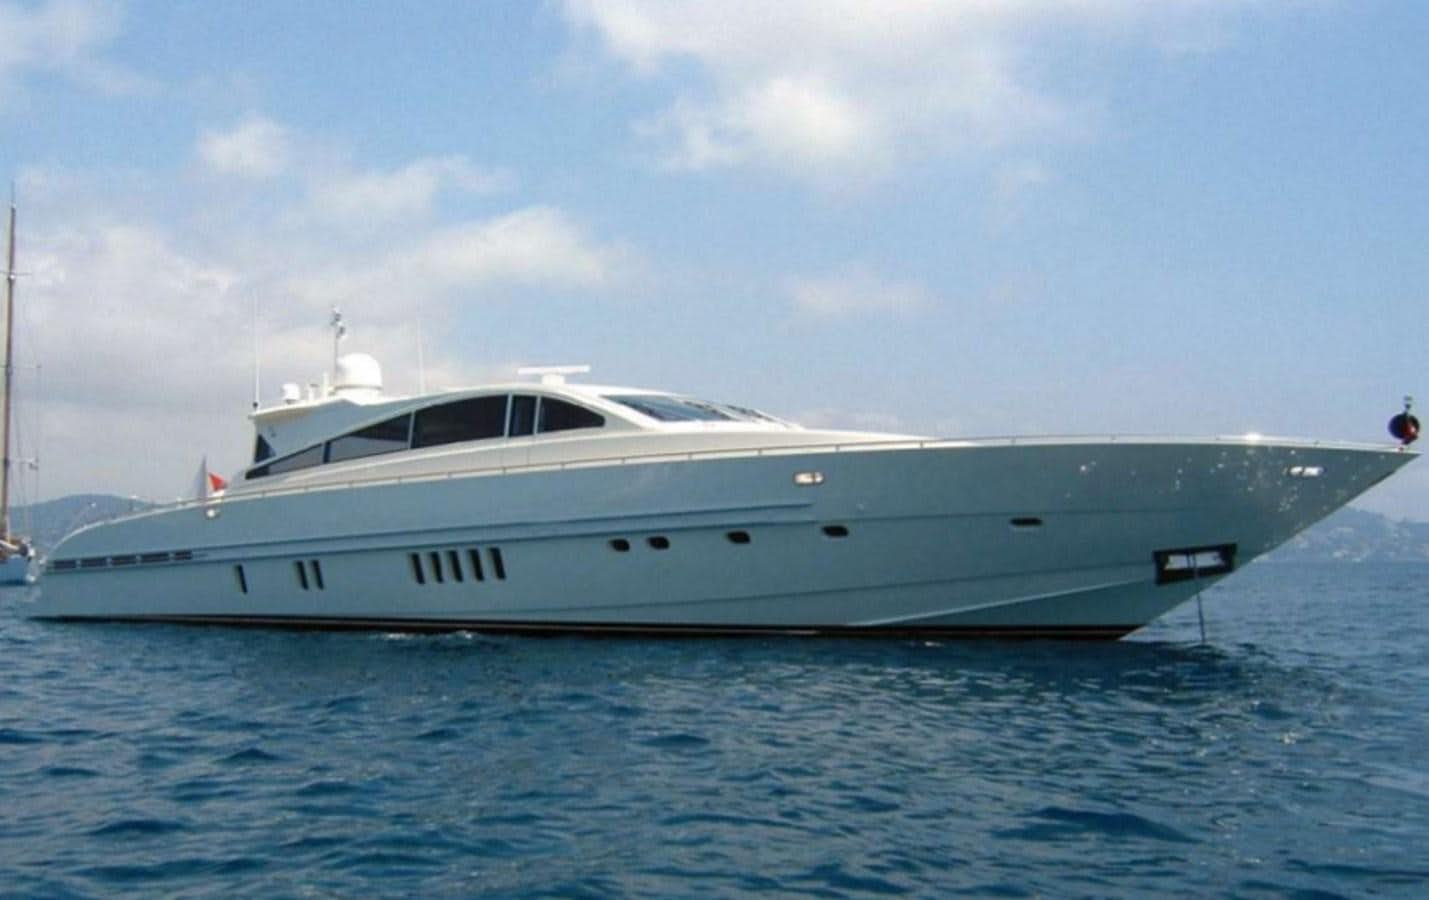 Mahy
Yacht for Sale